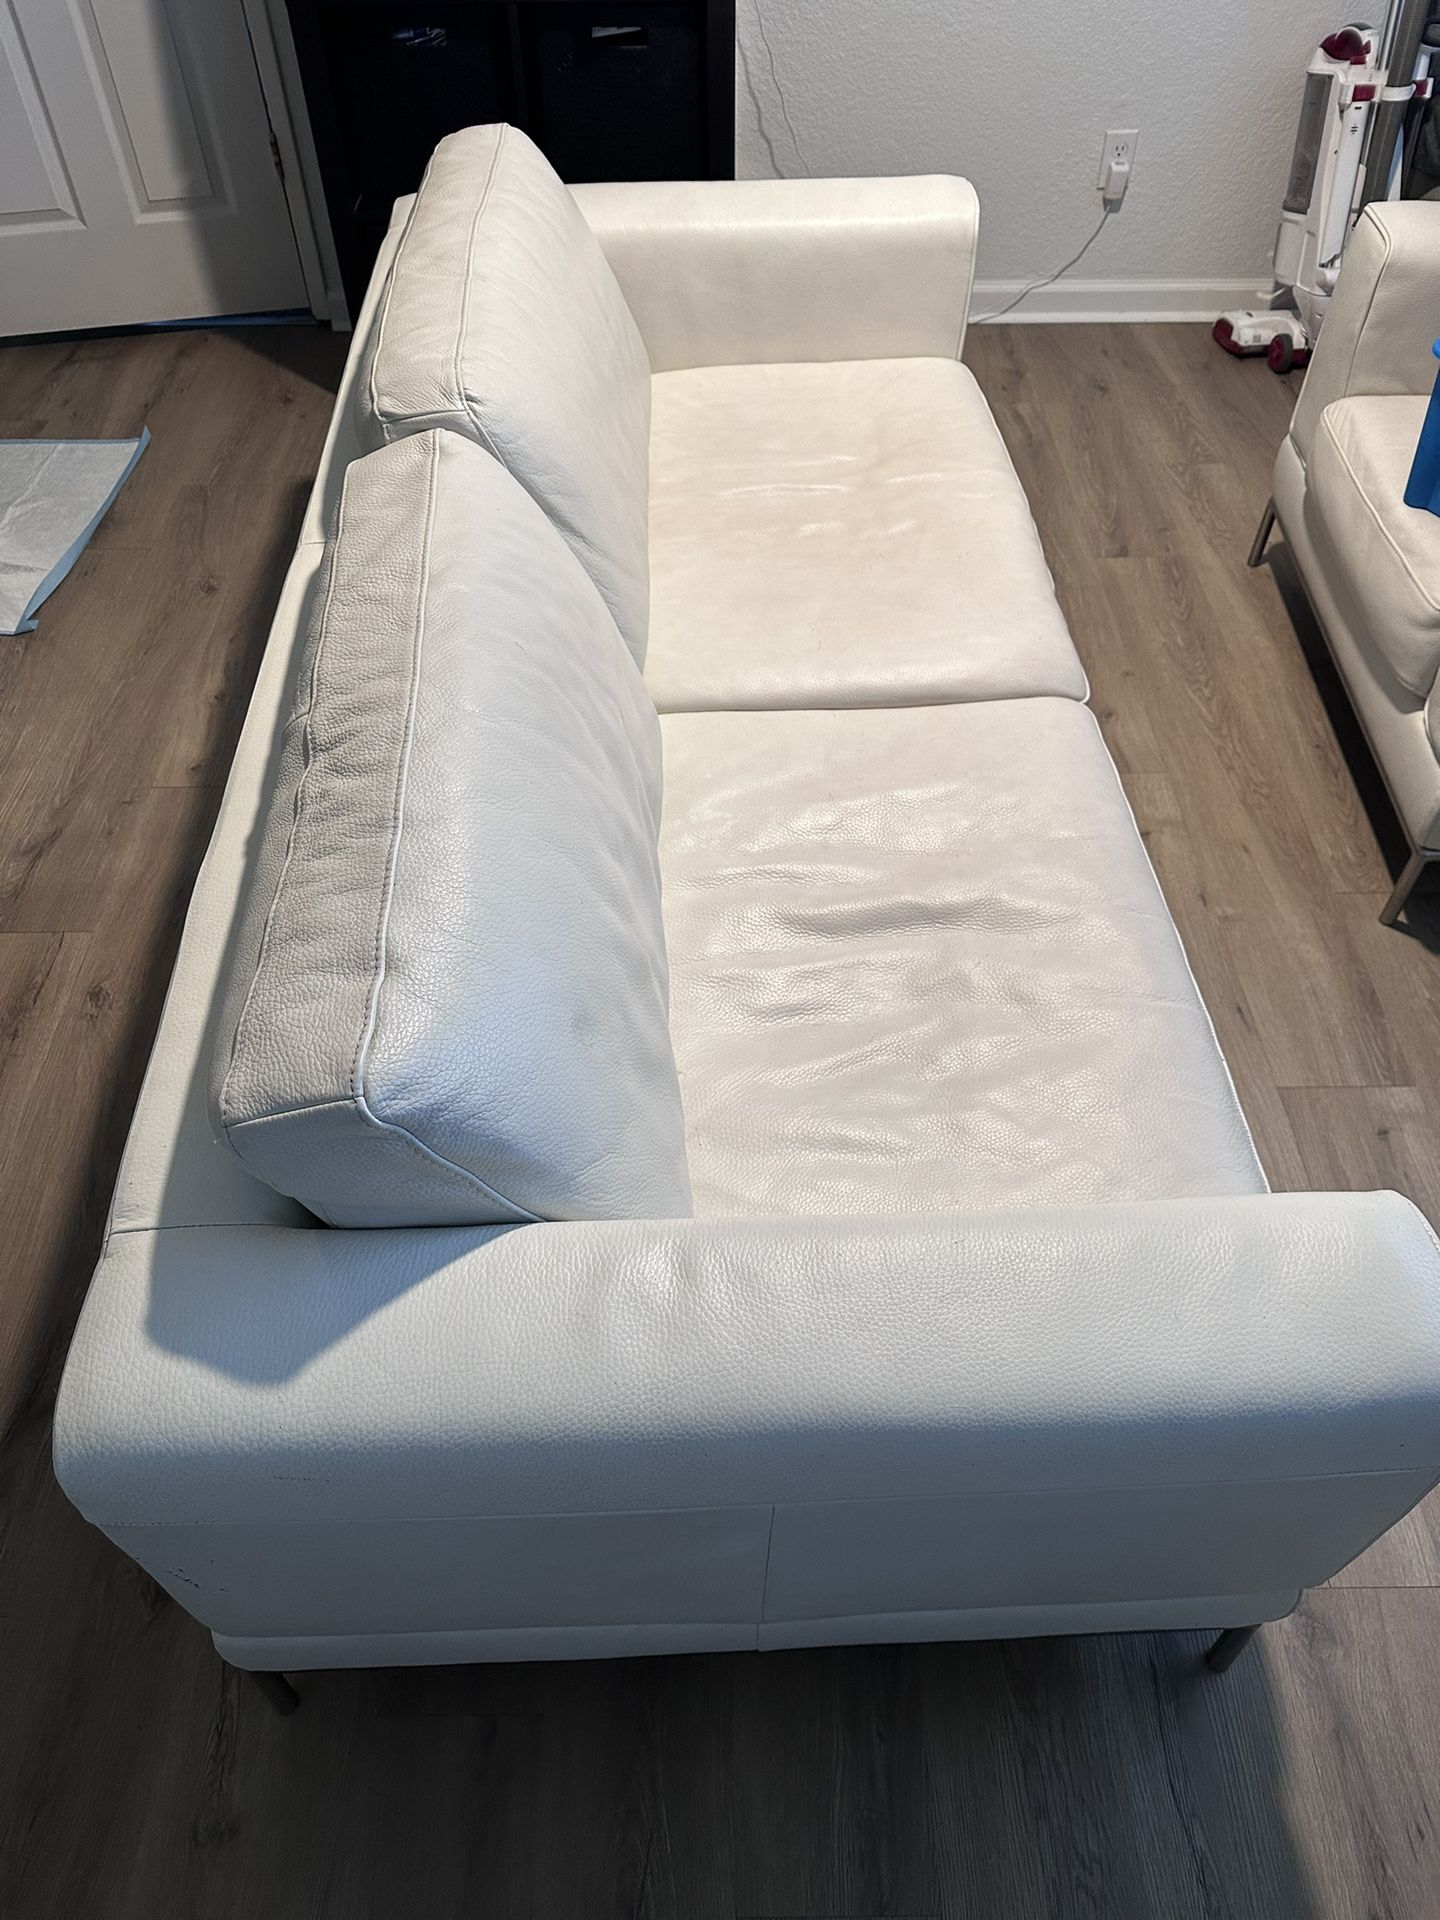 Modern white Leather Goose Down Filled Couch, Chair,  And  Ottoman 